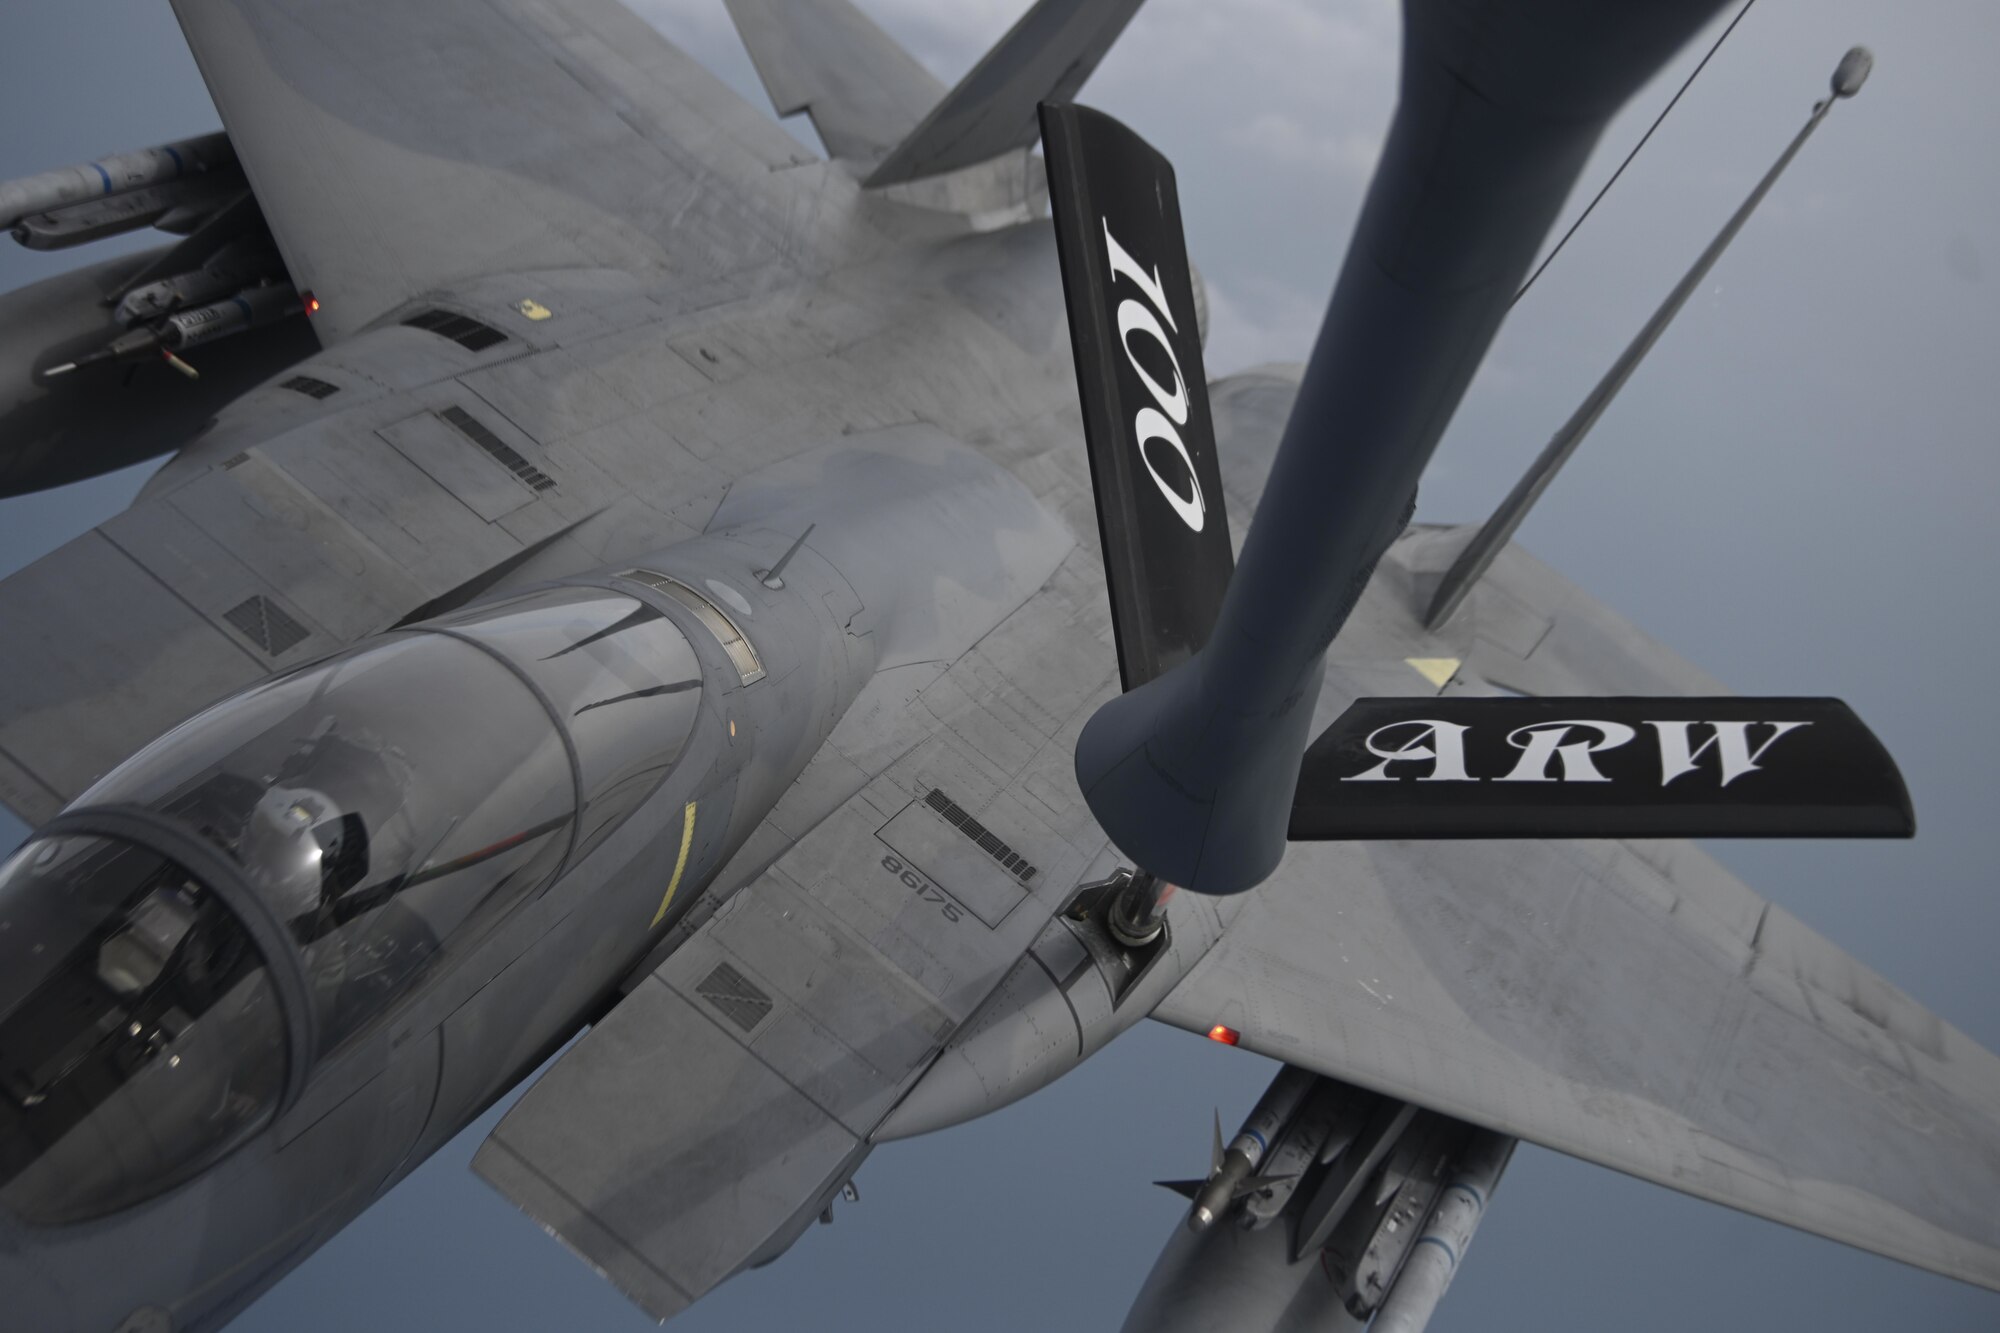 A U.S. Air Force F-15C Eagle aircraft assigned to the 48th Fighter Wing at Royal Air Force Lakenheath, England, receives fuel from a KC-135 Stratotanker aircraft assigned to the 100th Air Refueling Wing at RAF Mildenhall, England, over the North Sea, July 27, 2021. The KC-135 Stratotanker extends the range of fighter, bomber and transport aircraft. (U.S. Air Force photo by Senior Airman Joseph Barron)